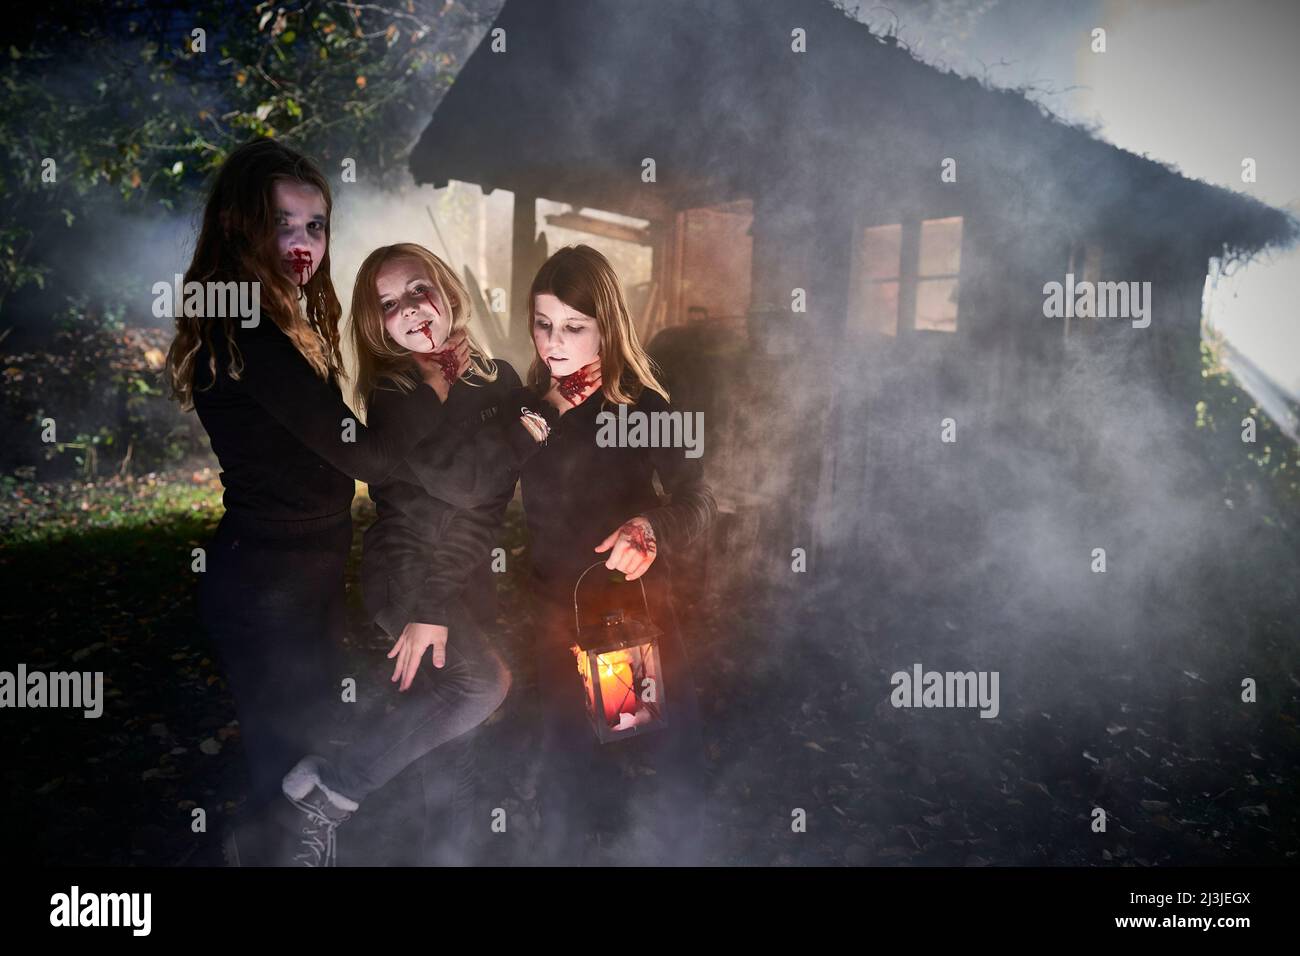 3 young girls with Halloween costumes in front of hut, in fog Stock Photo